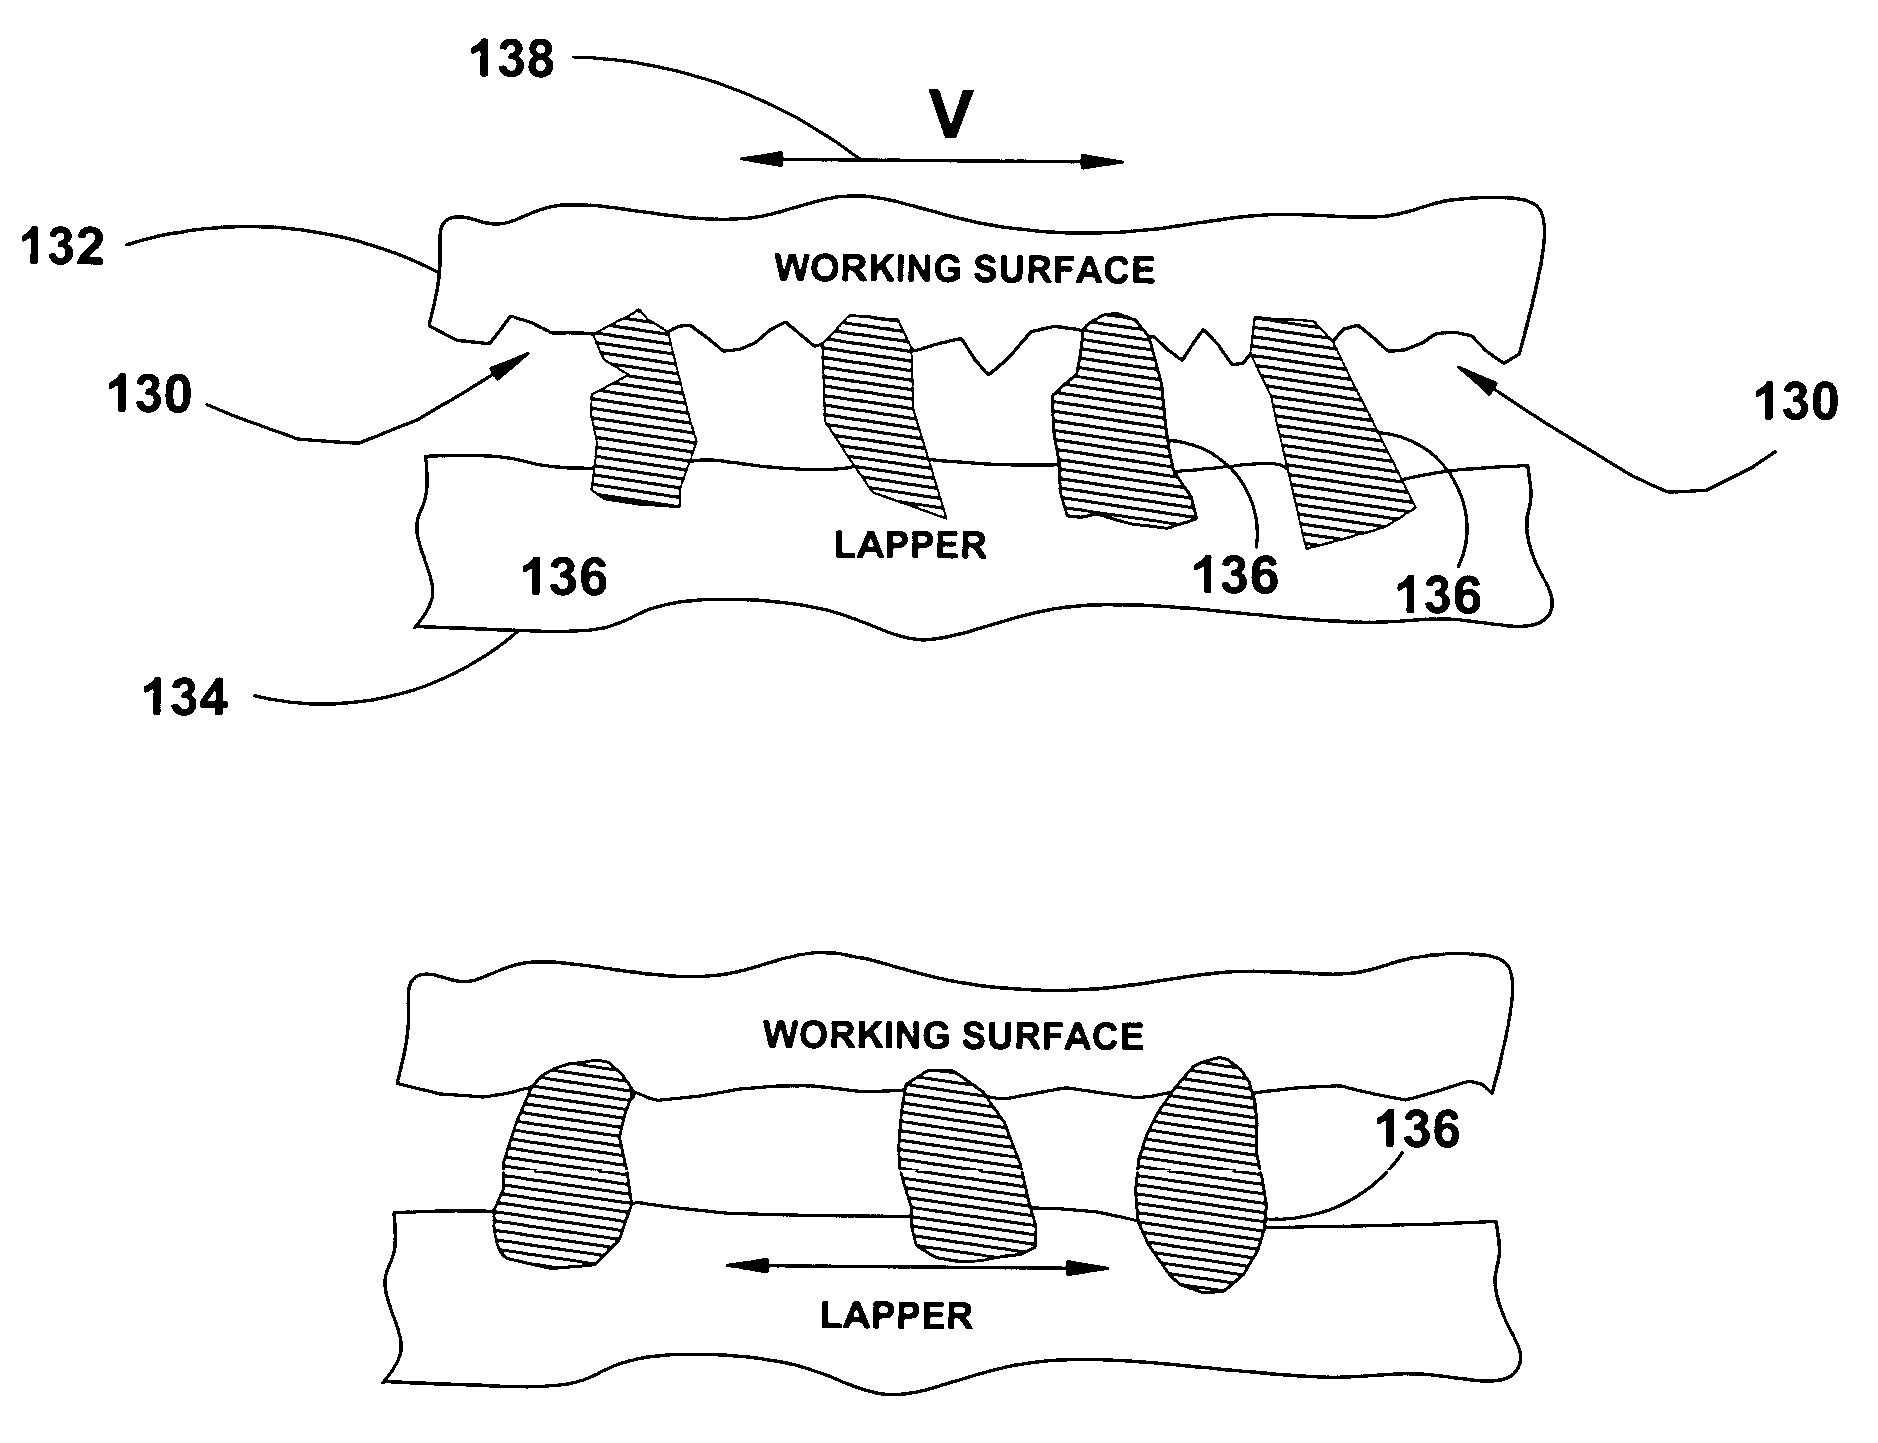 Method for reducing wear of mechanically interacting surfaces